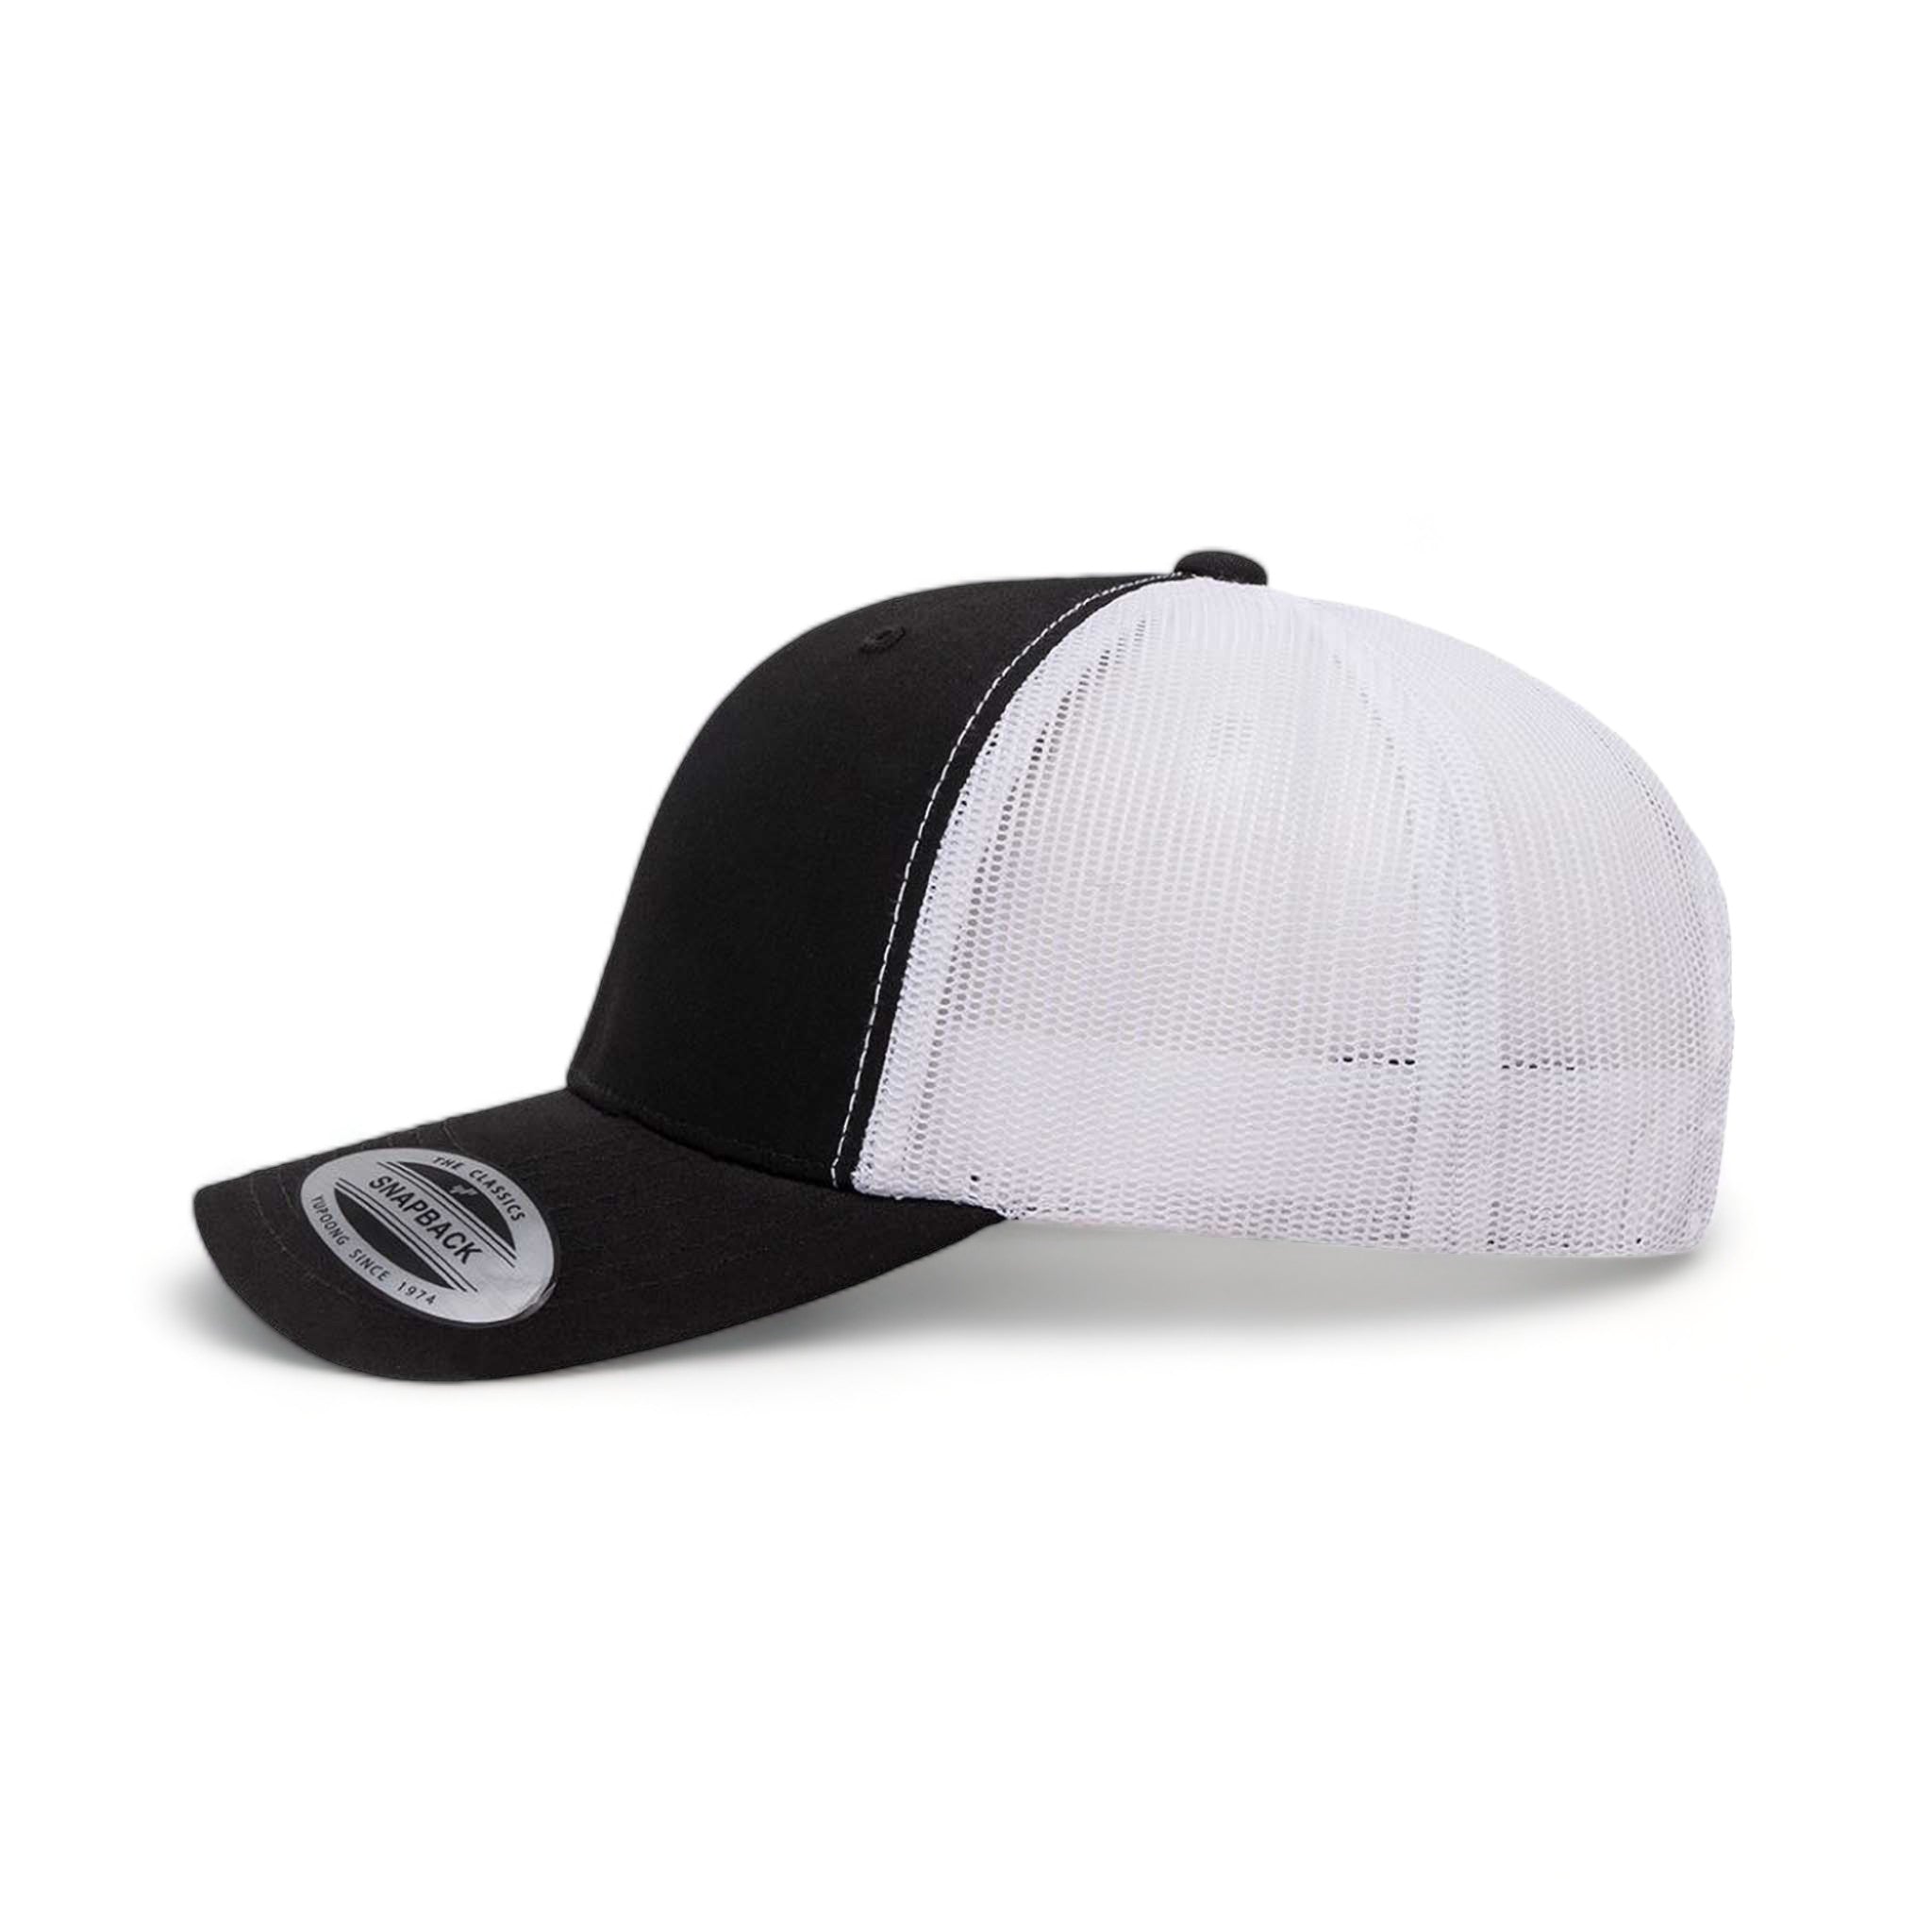 Side view of YP Classics 6606 custom hat in black and white